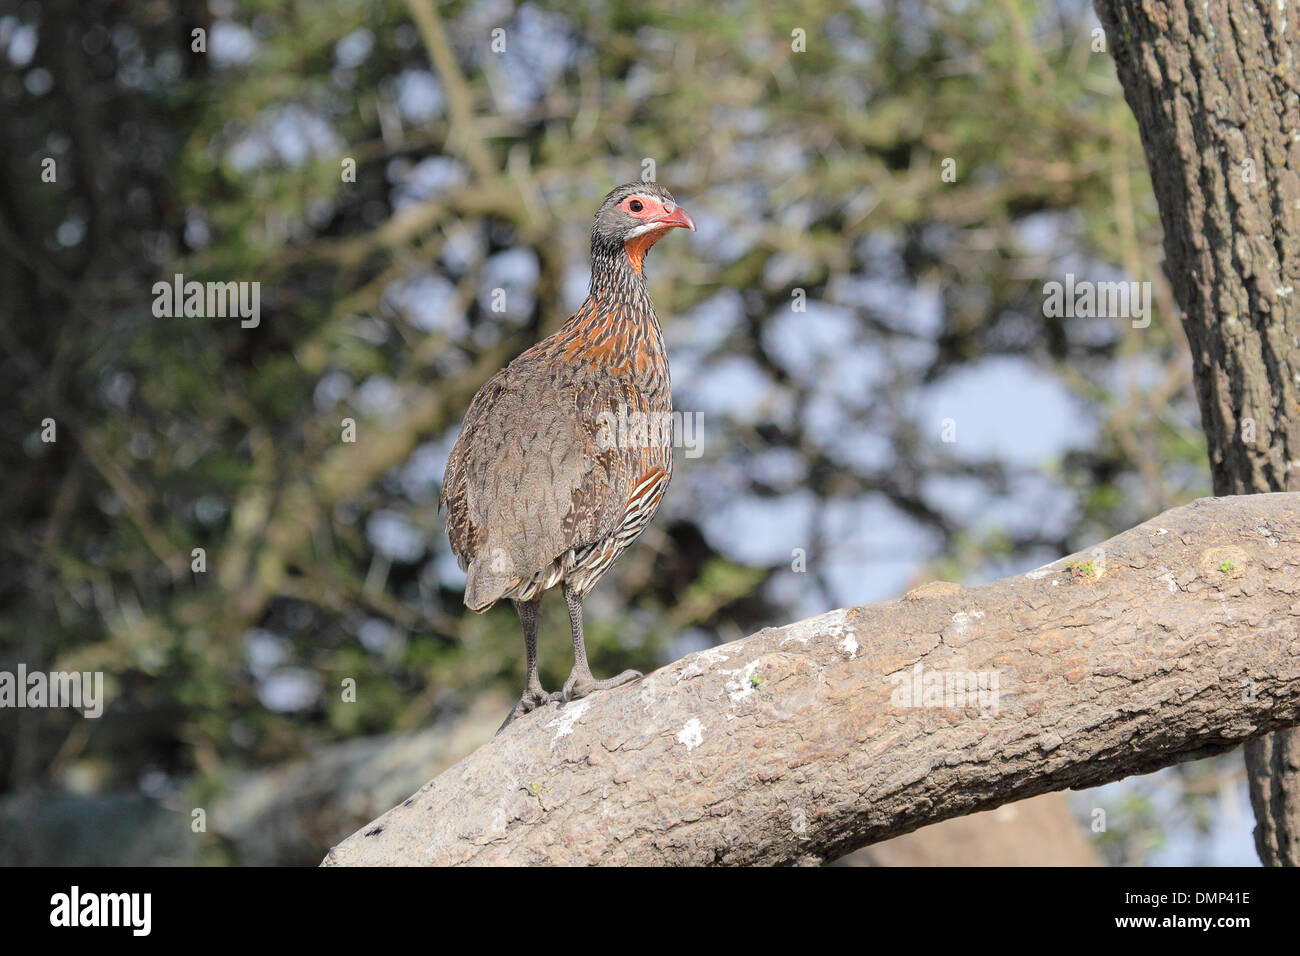 A Red-necked Spurfowl or Francolin (Pternistis afer) perched on a branch Stock Photo